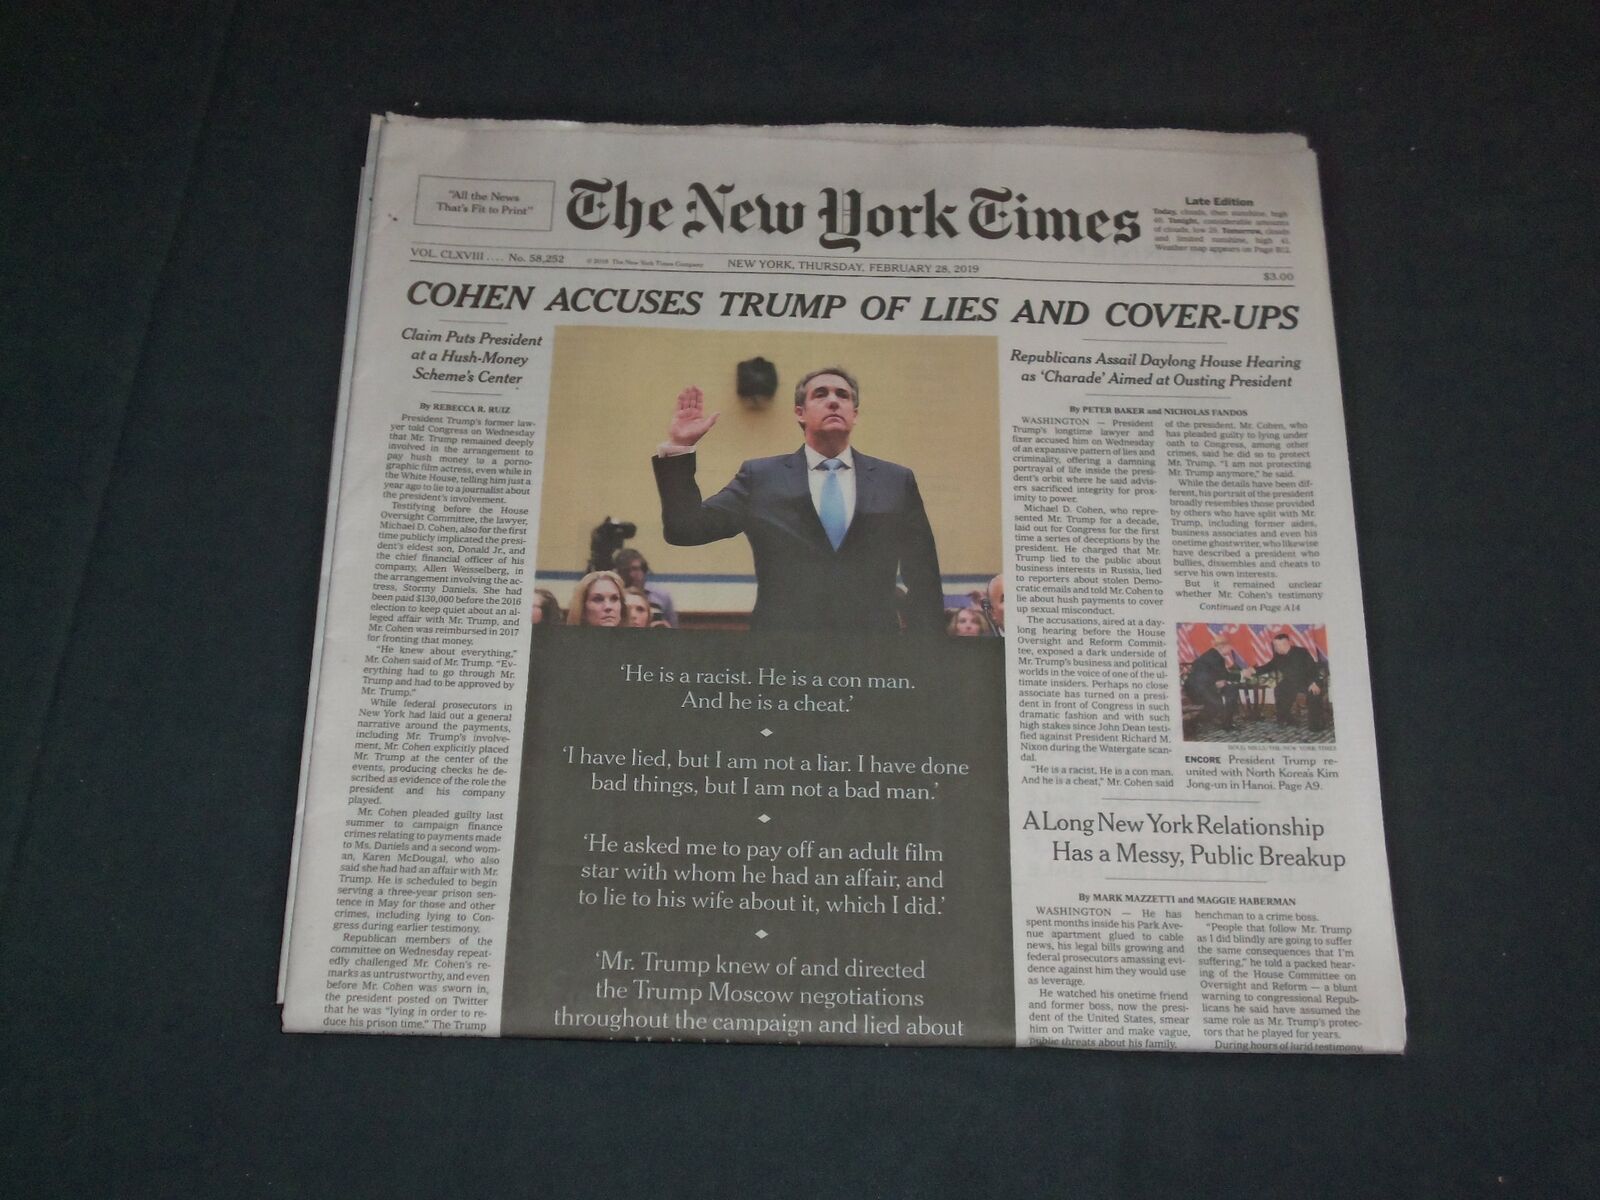 2019 FEBRUARY 28 NEW YORK TIMES - COHEN ACCUSES TRUMP OF LIES AND COVER-UPS